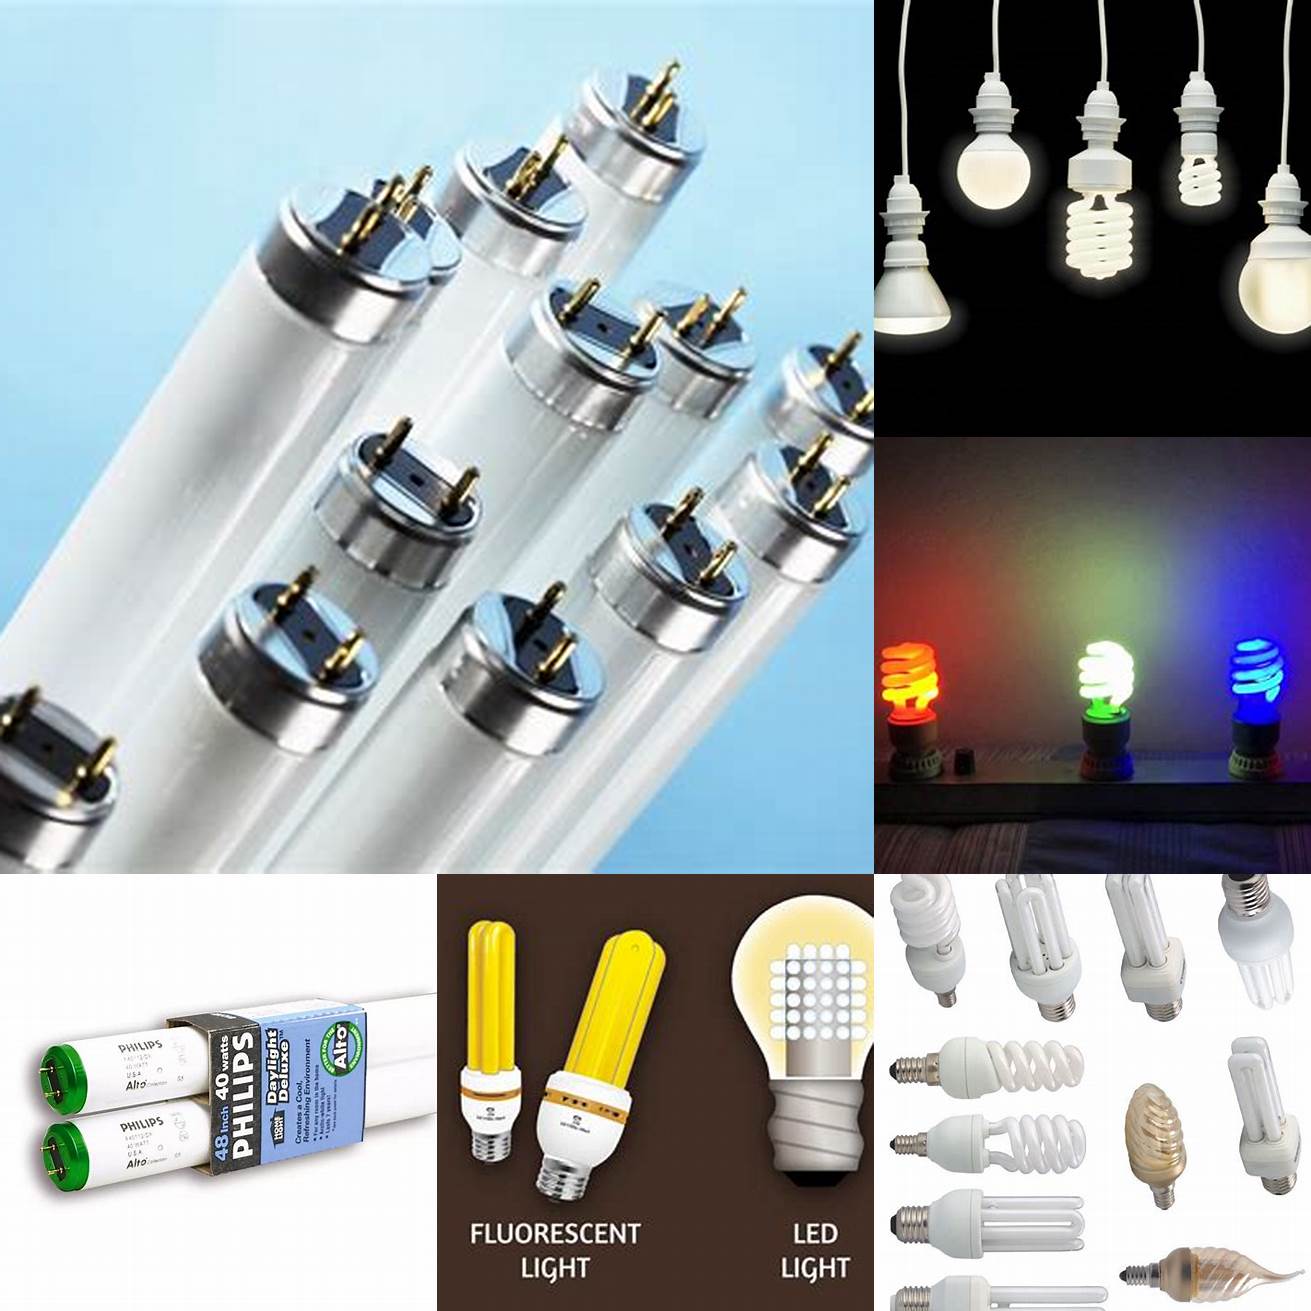 Available in different colors Fluorescent bulbs come in a variety of colors so you can choose the one that best suits your needs